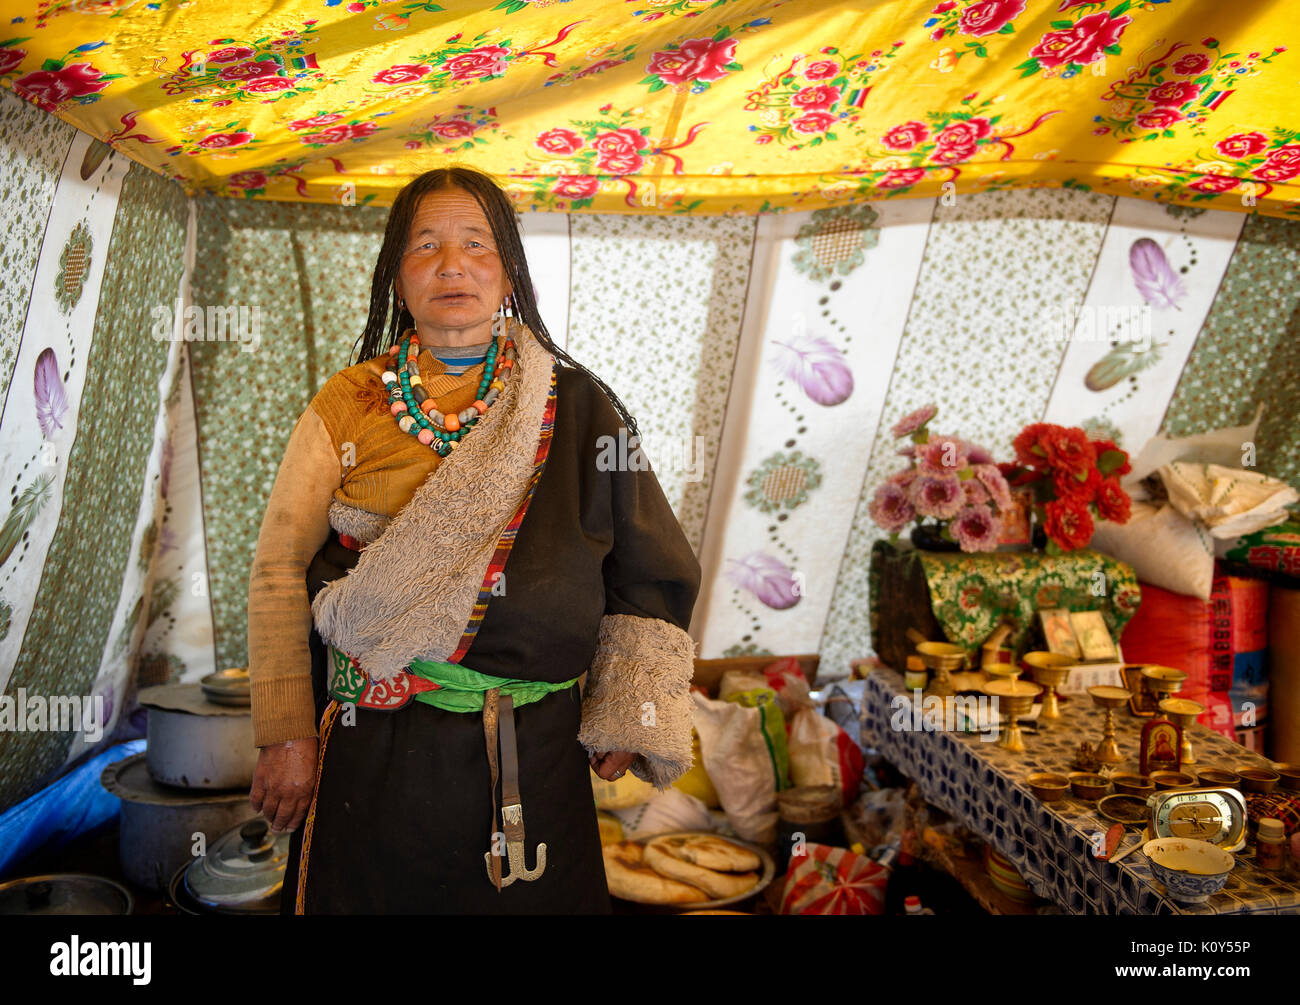 After a long day of work, tibetan nomads rest in their tent, cook and chat Stock Photo